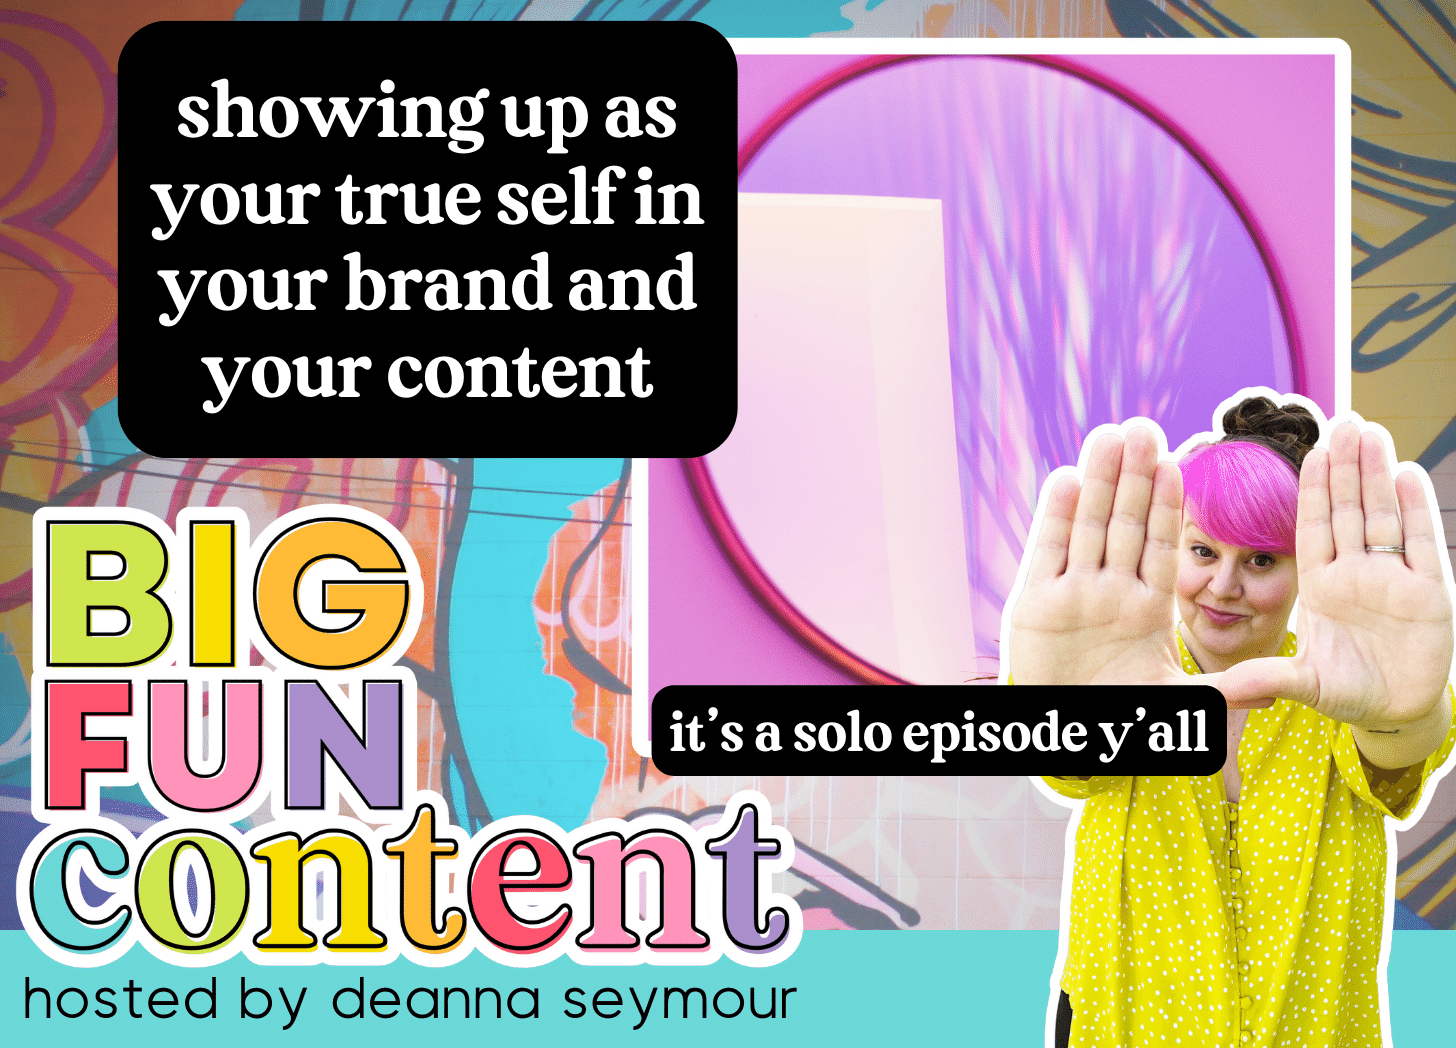 podcast episode, big fun content, hosted by deanna seymour, colorful text, bright colors